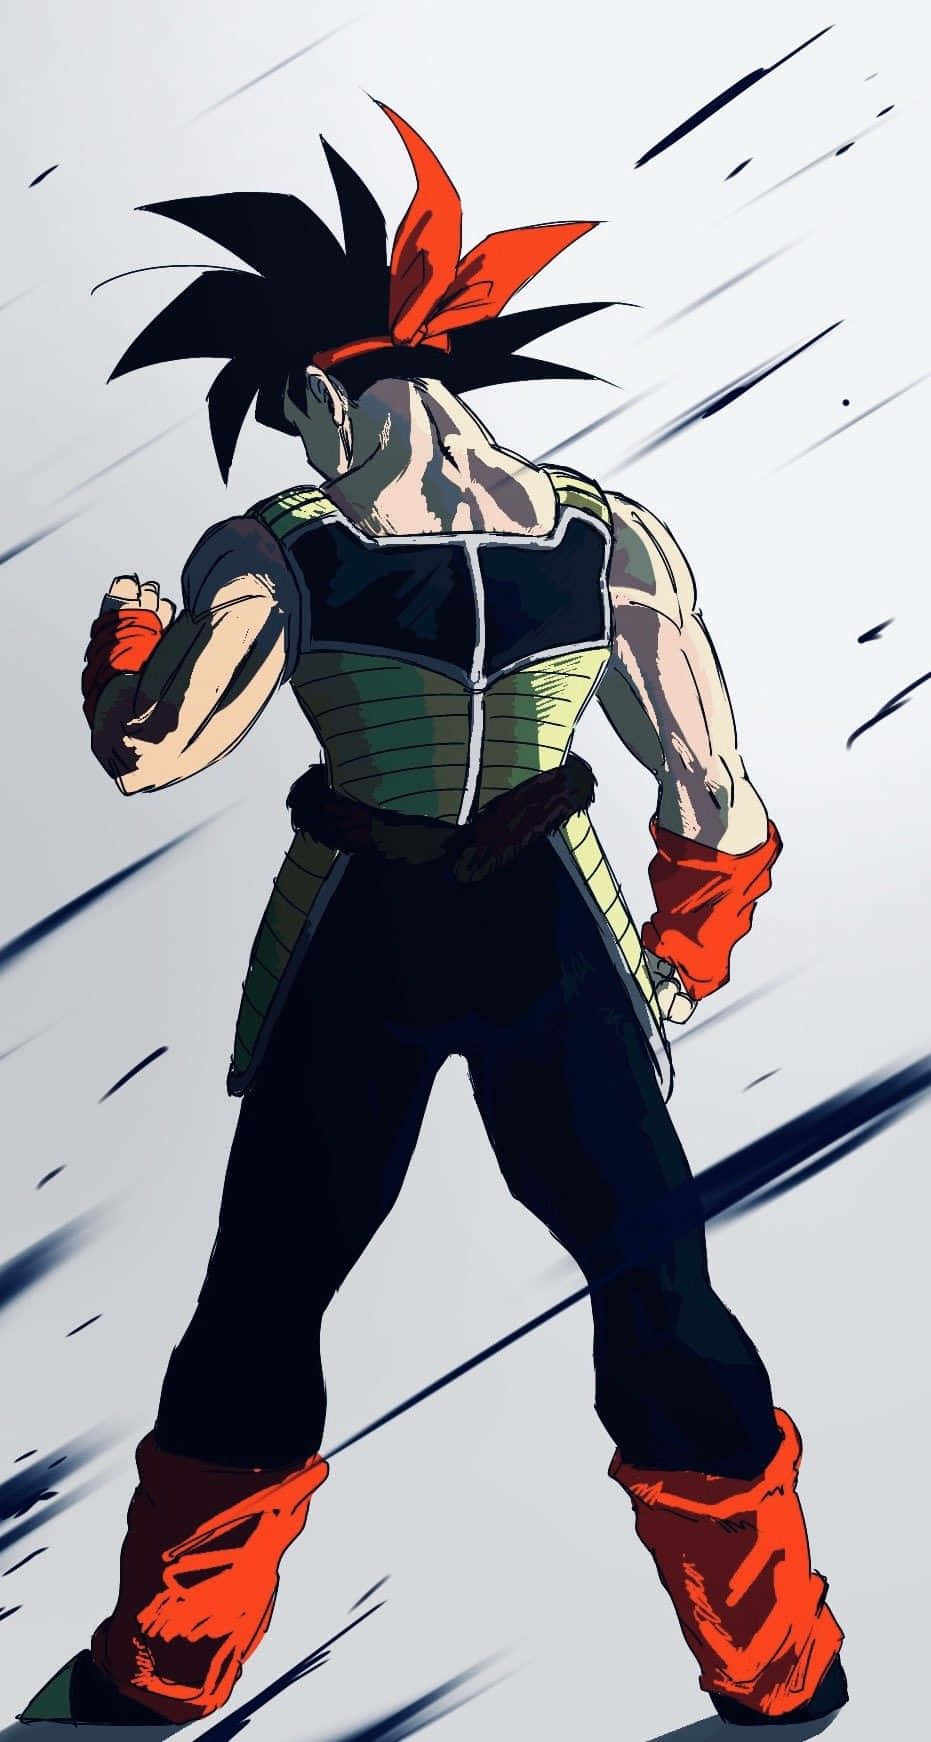 The Iconic Bardock Transforms In A Flash of Light Wallpaper